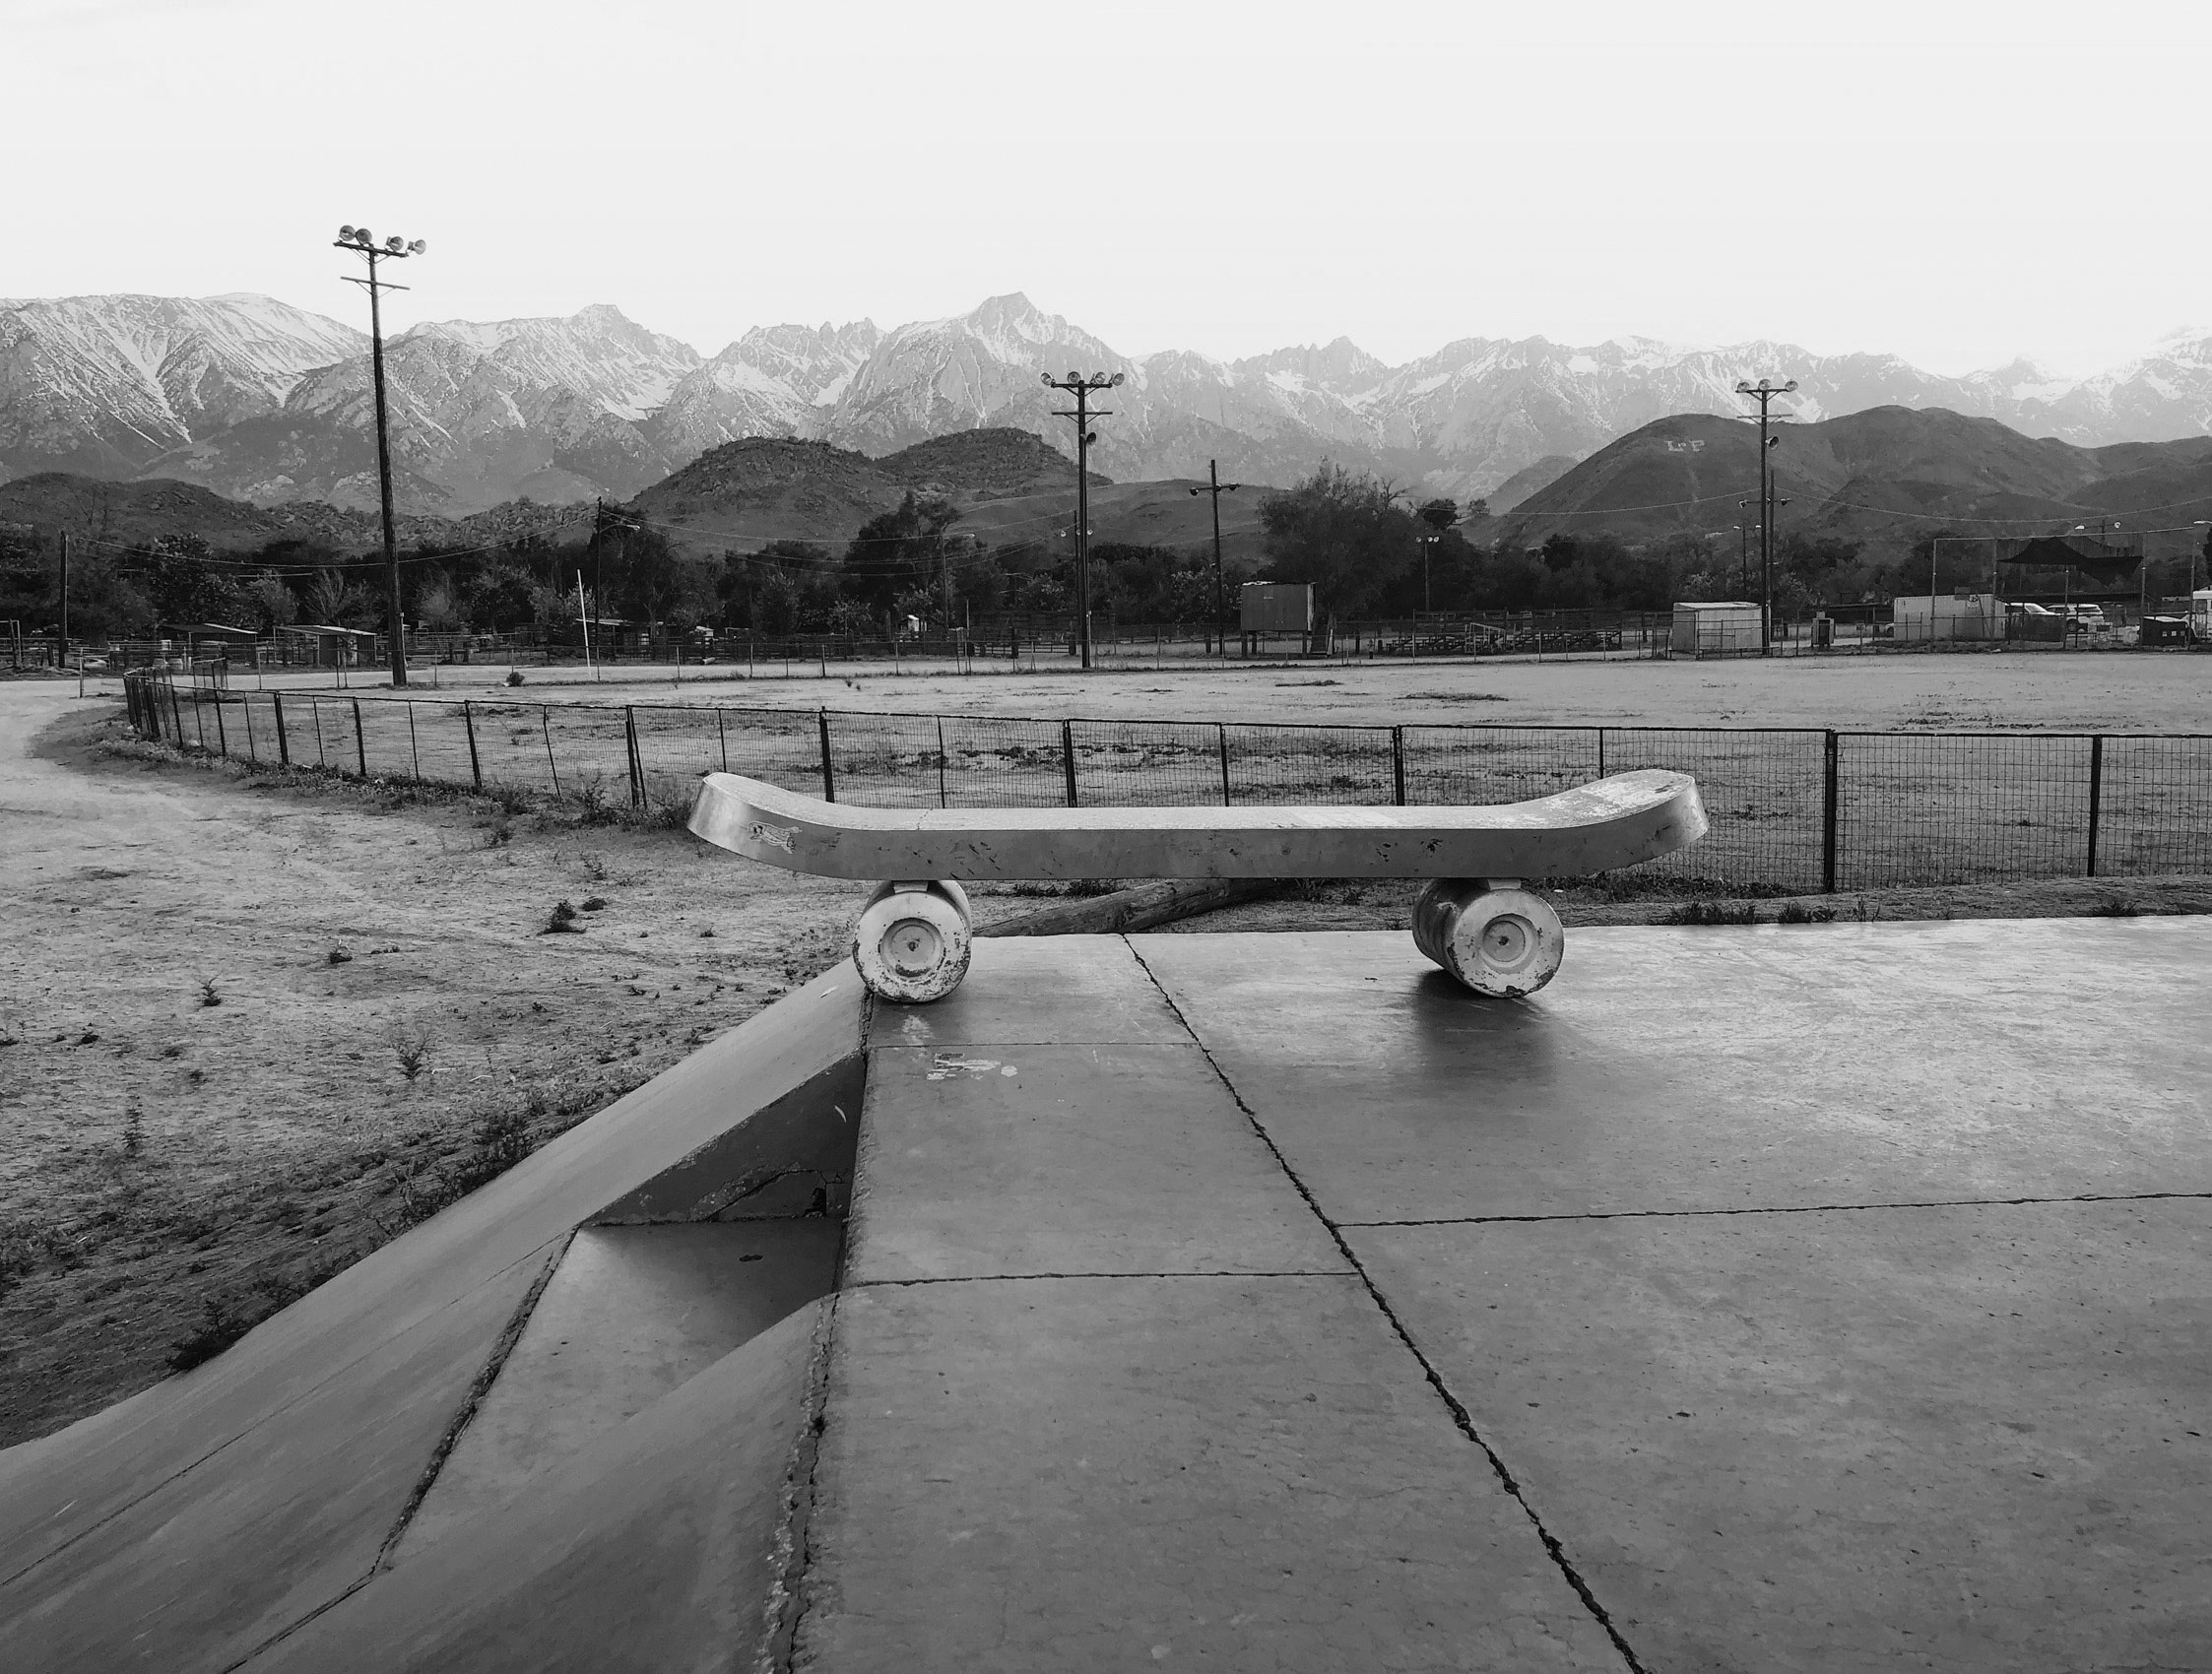 Roadtripping_MiddleOfNowhere_SkateParkProject_Park35a_Retouched